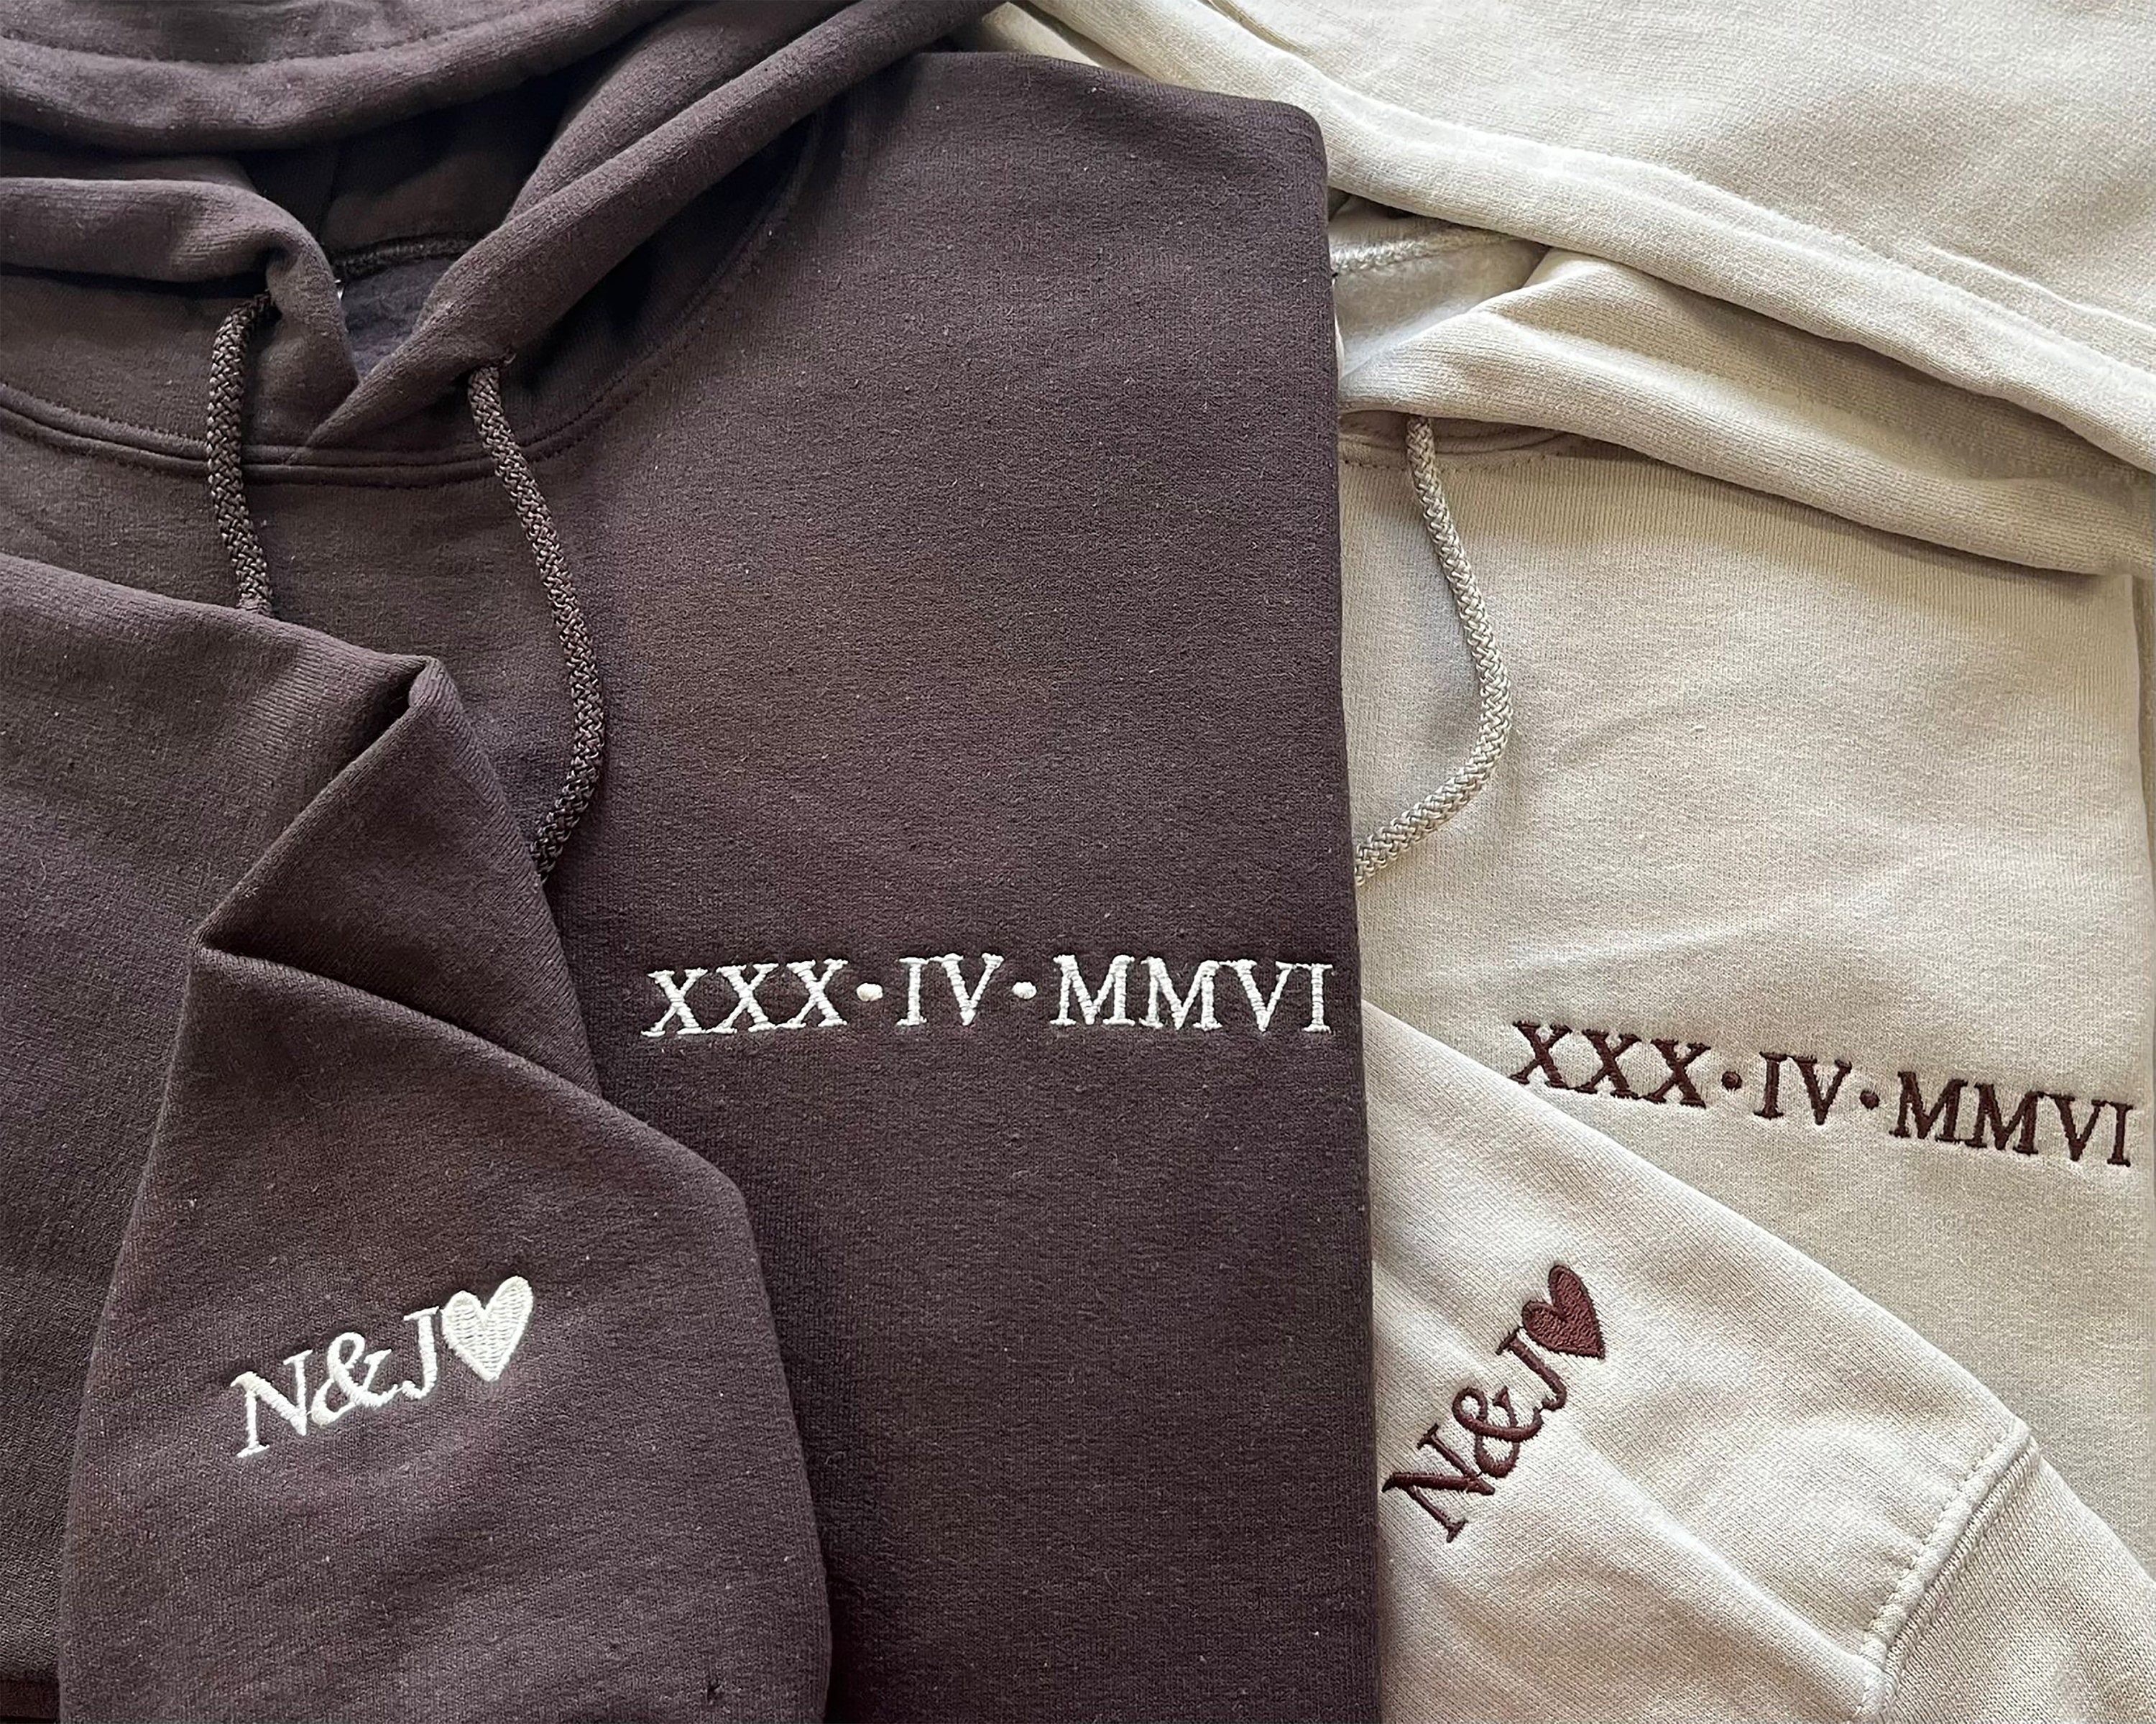  Matching Hoodies for Couples BF and GF, Personalized  Embroidered Roman Numerals Hood, Sudaderas Para Parejas de Novios Igueales,  Sudaderas Para Mujer : Handmade Products